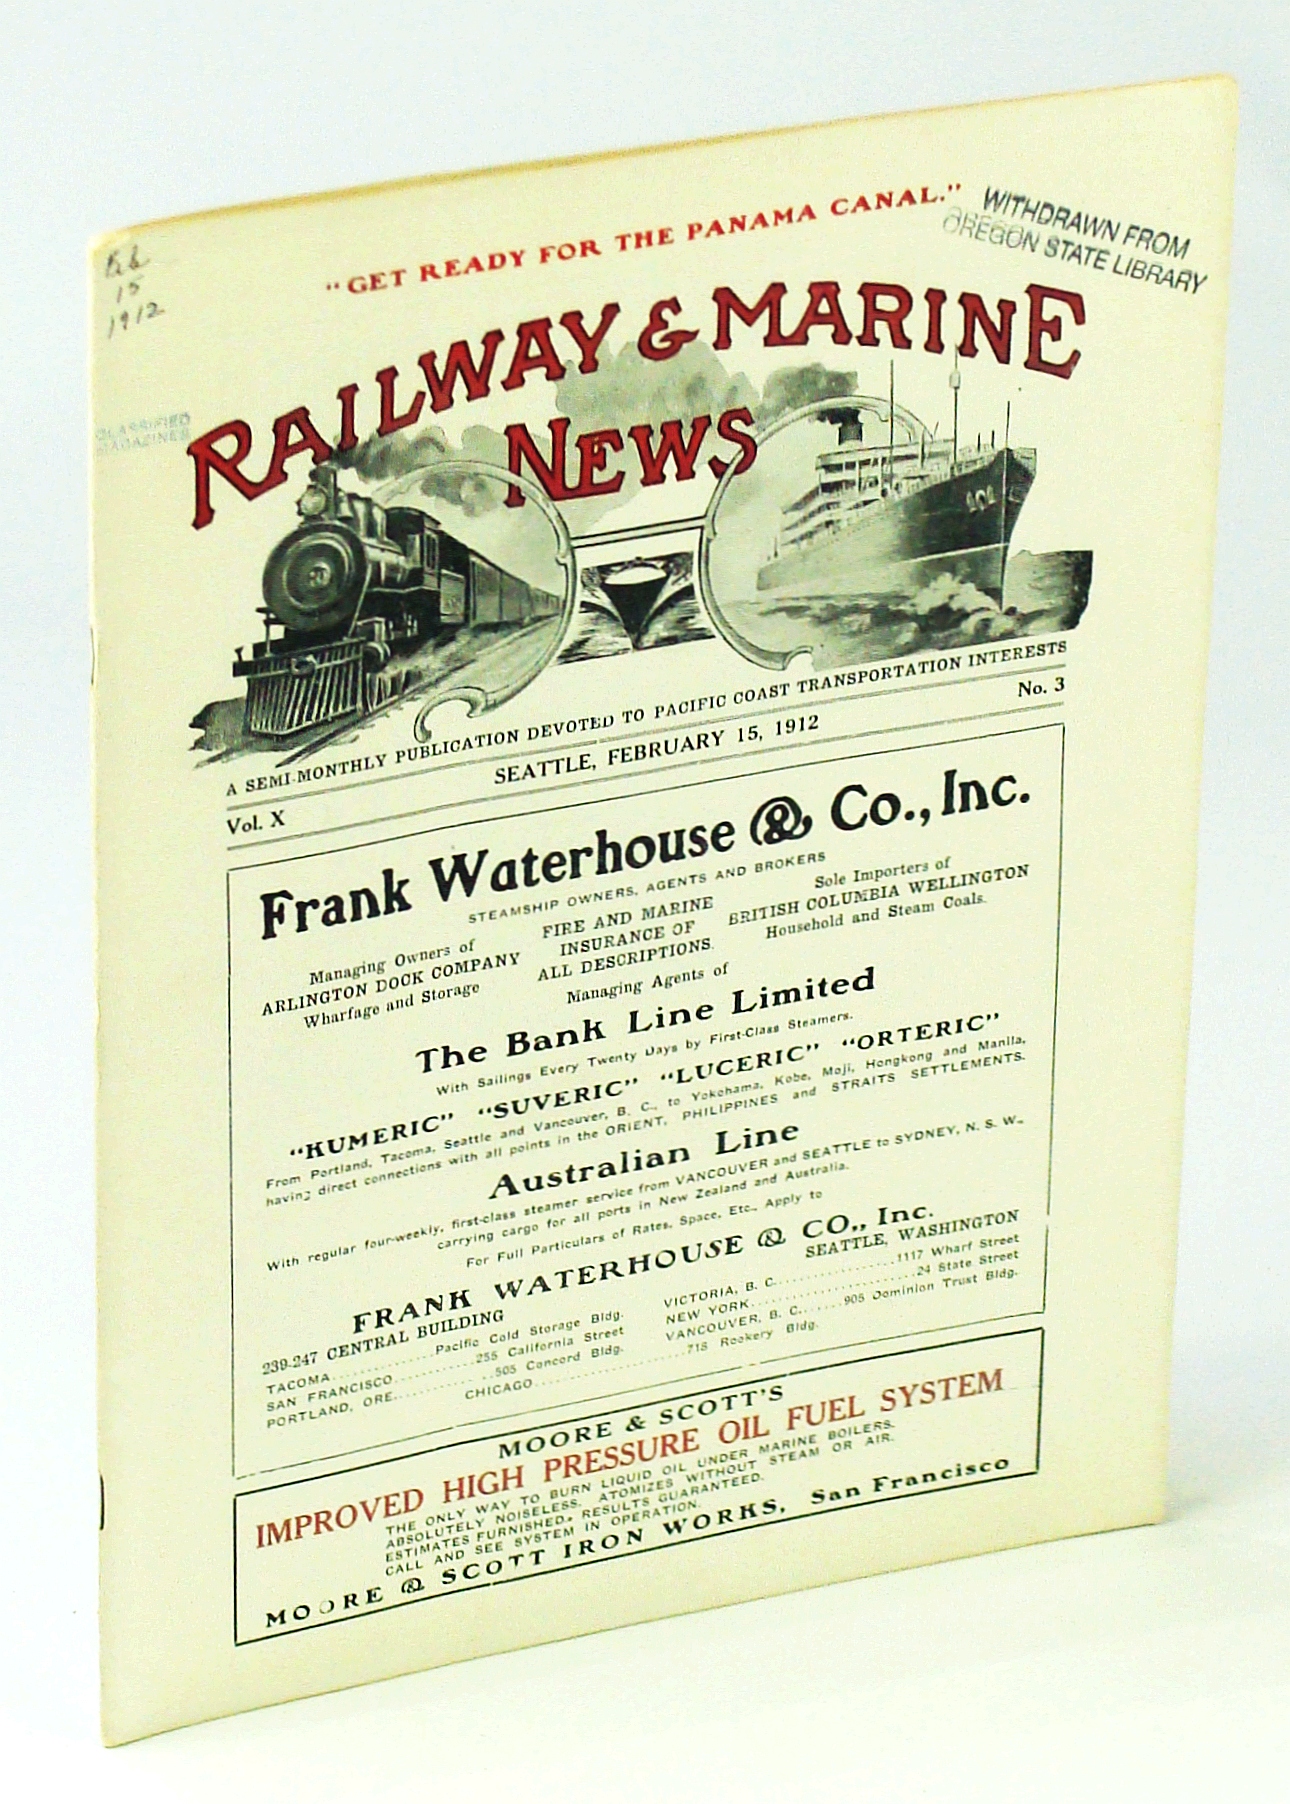 CALHOUN, SCOTT; CLOSSON, C.C. - Railway & Marine News, a Semi-Monthly Publication Devoted to Pacific Coast Transportation Interests, February 15, 1912, Vol. X, No. 3 - the Successful Gas-Driven Holzapfel 1 / Harbor Island Terminals and What They Mean